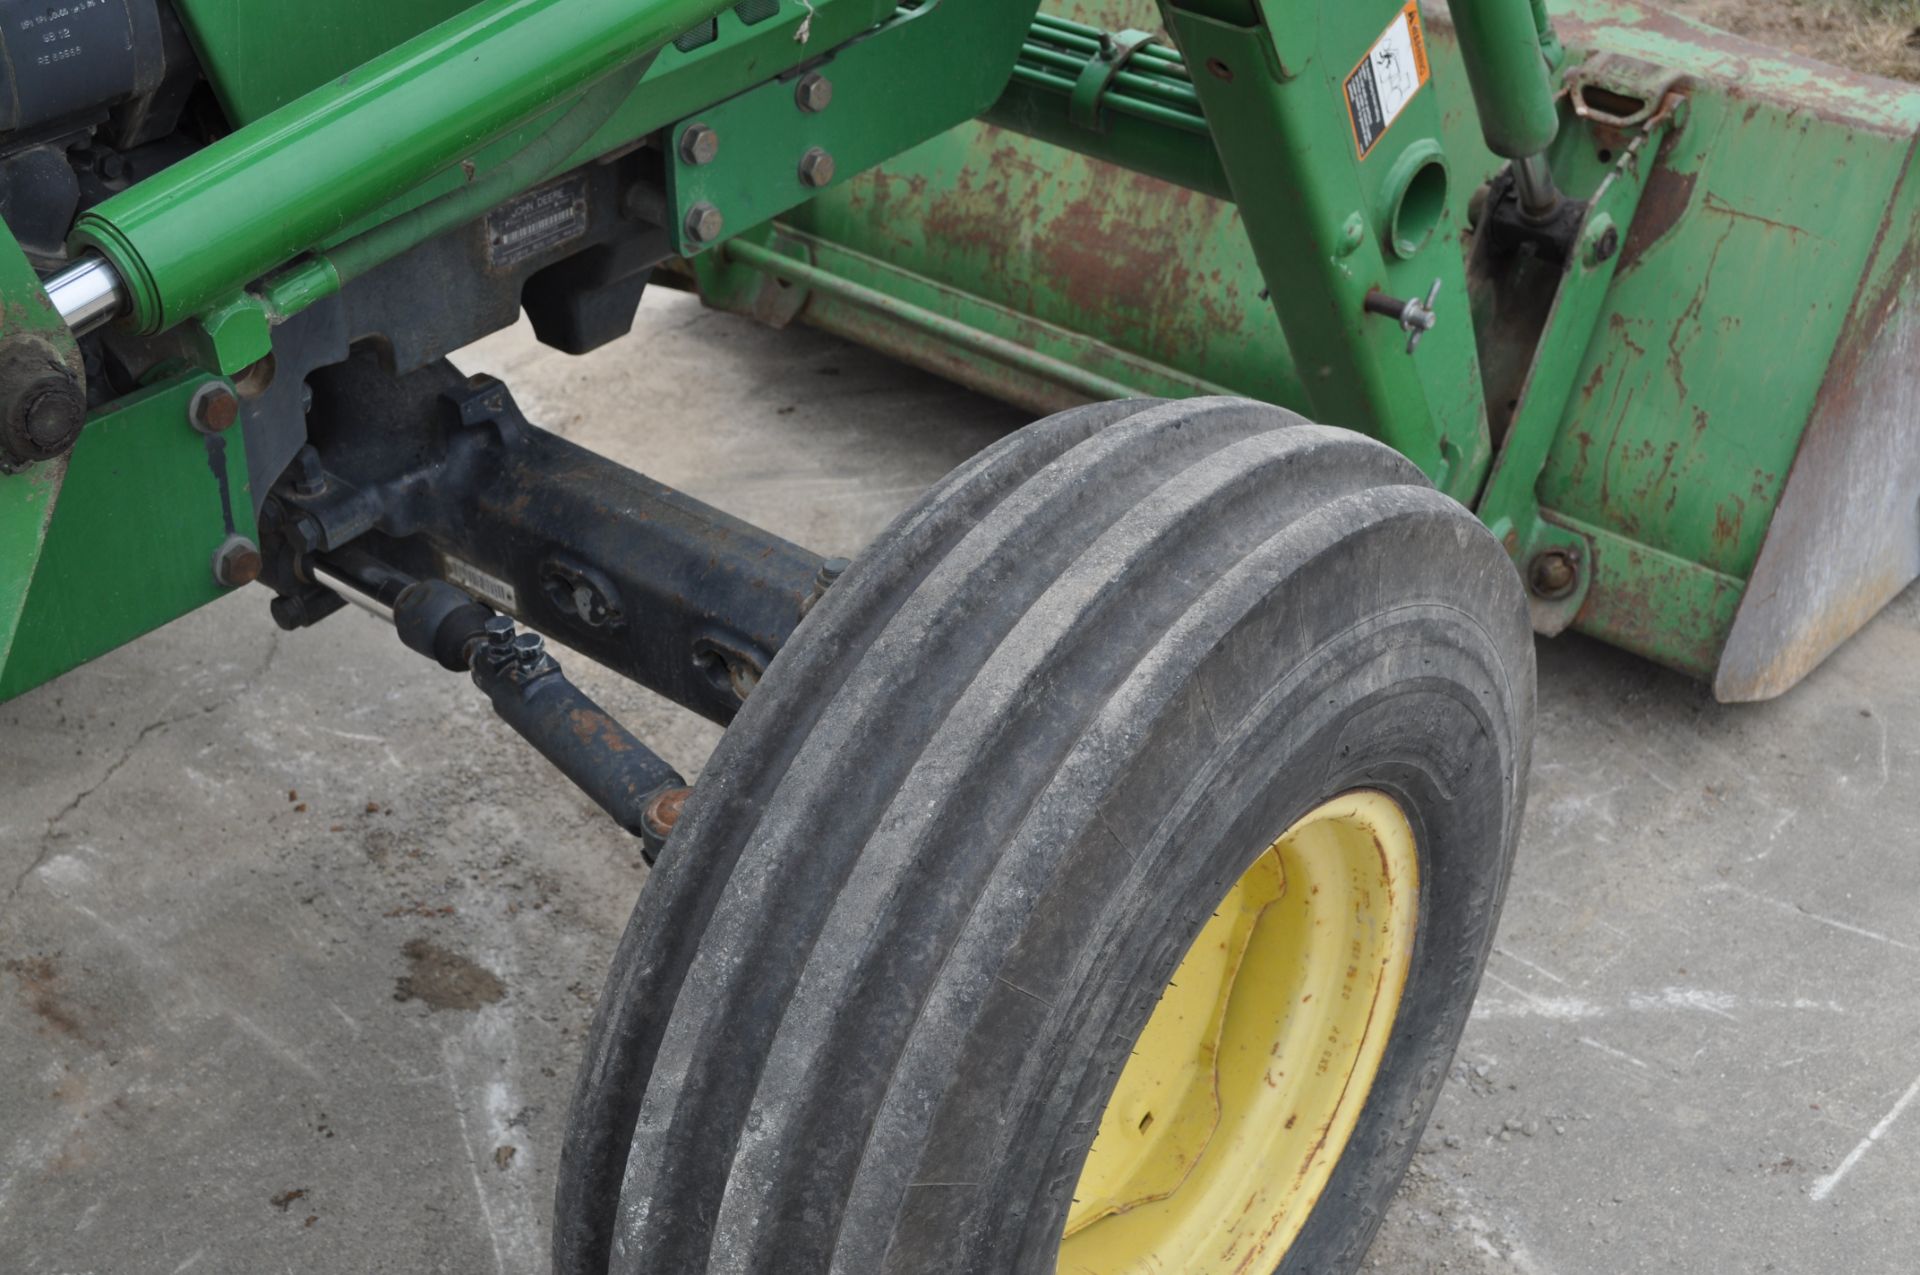 John Deere 5410 tractor, 2WD, w/ 520 loader, 16.9-30 rear tires, 11 L 15.5 front tires, 4090 hrs - Image 8 of 15